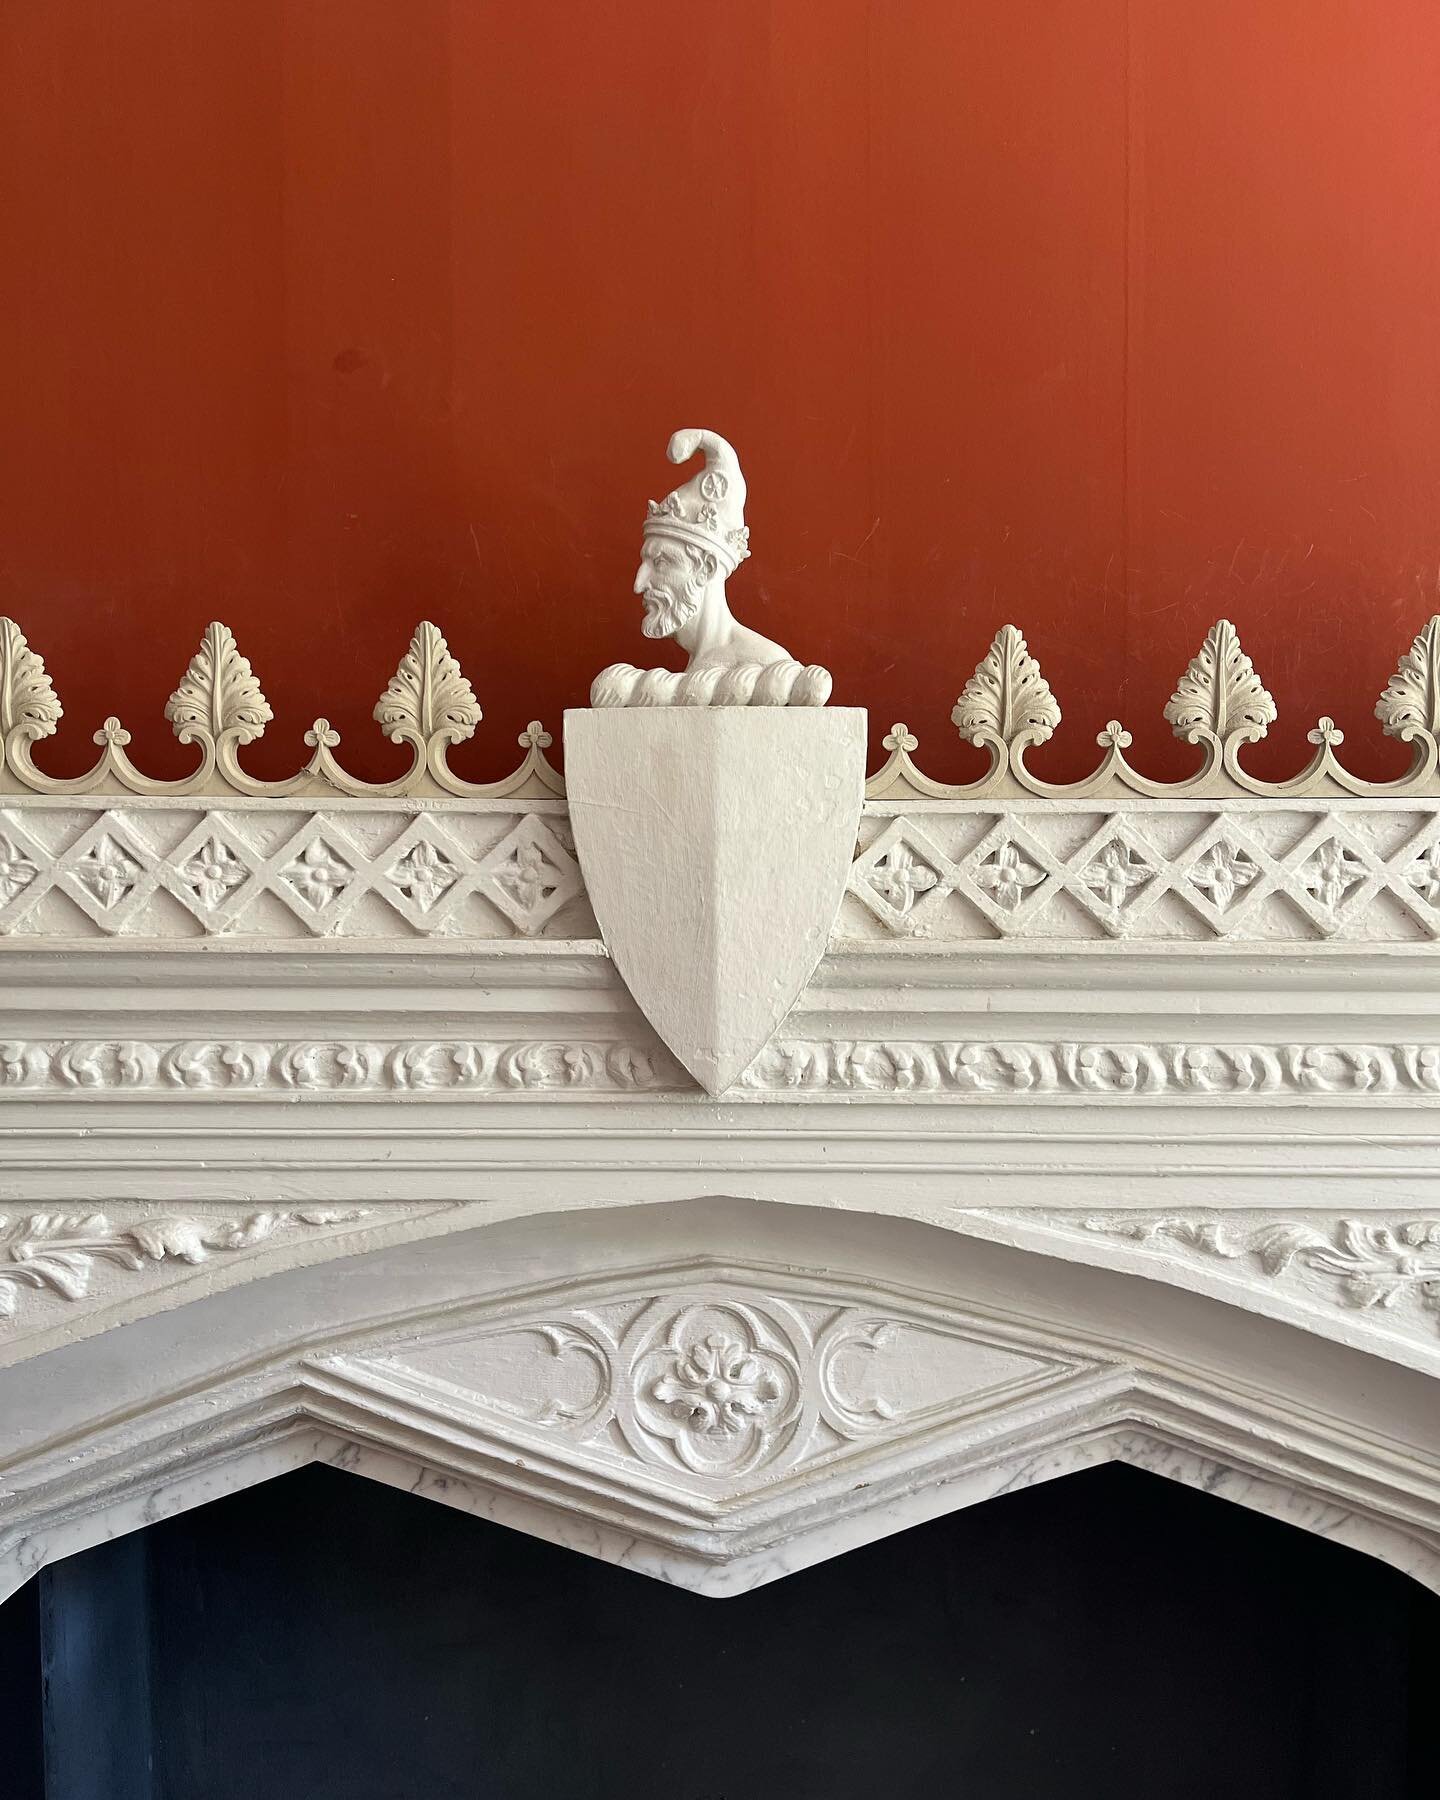 Photos from our visit to @strawbhillhouse - it&rsquo;s all in the details!

#gothicrevival #neogothic #horacewalpole #strawberryhill #strawberryhillhouse #decorativearts